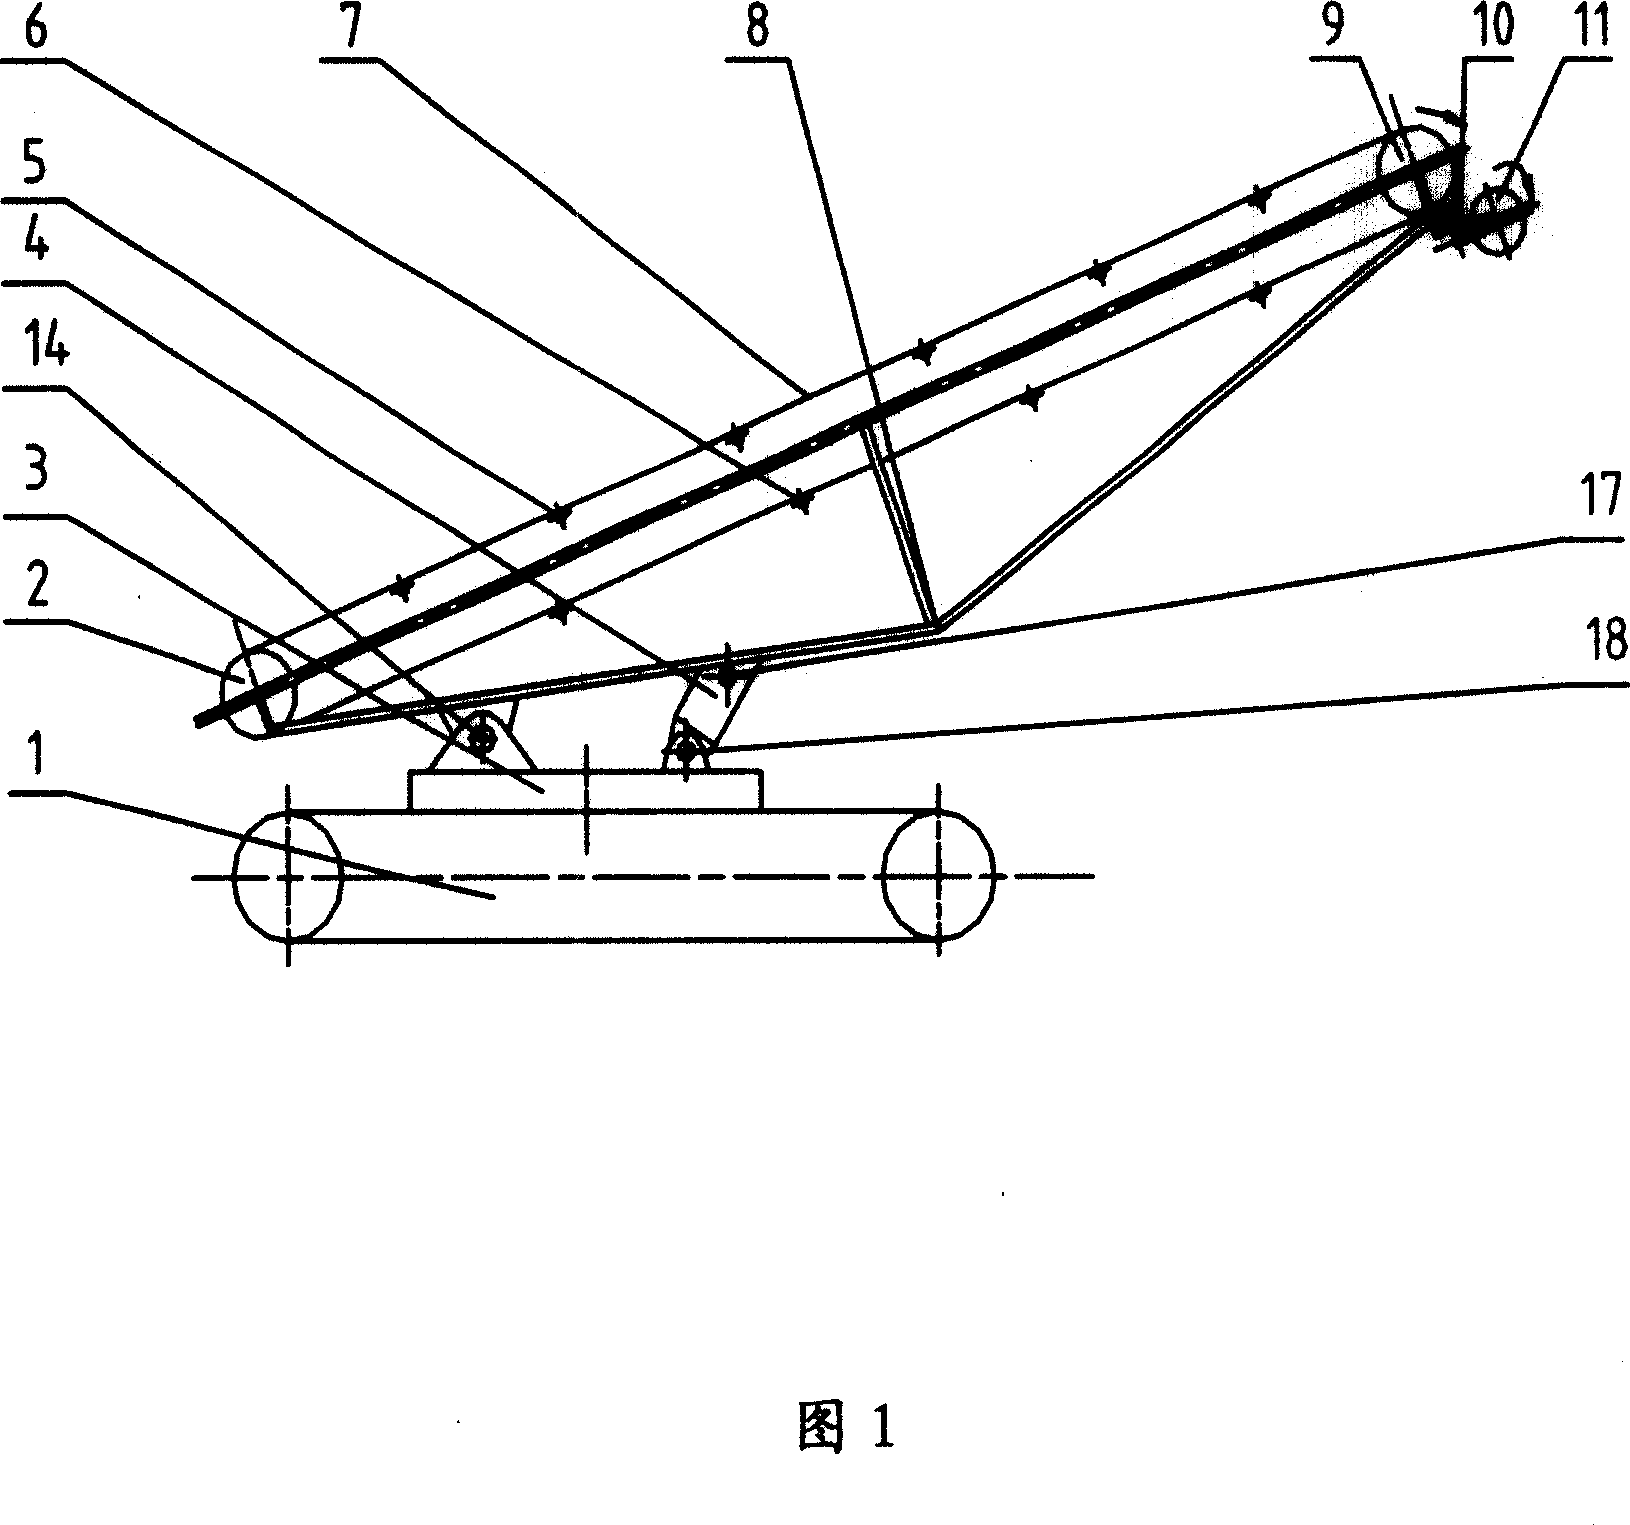 Materials casting device